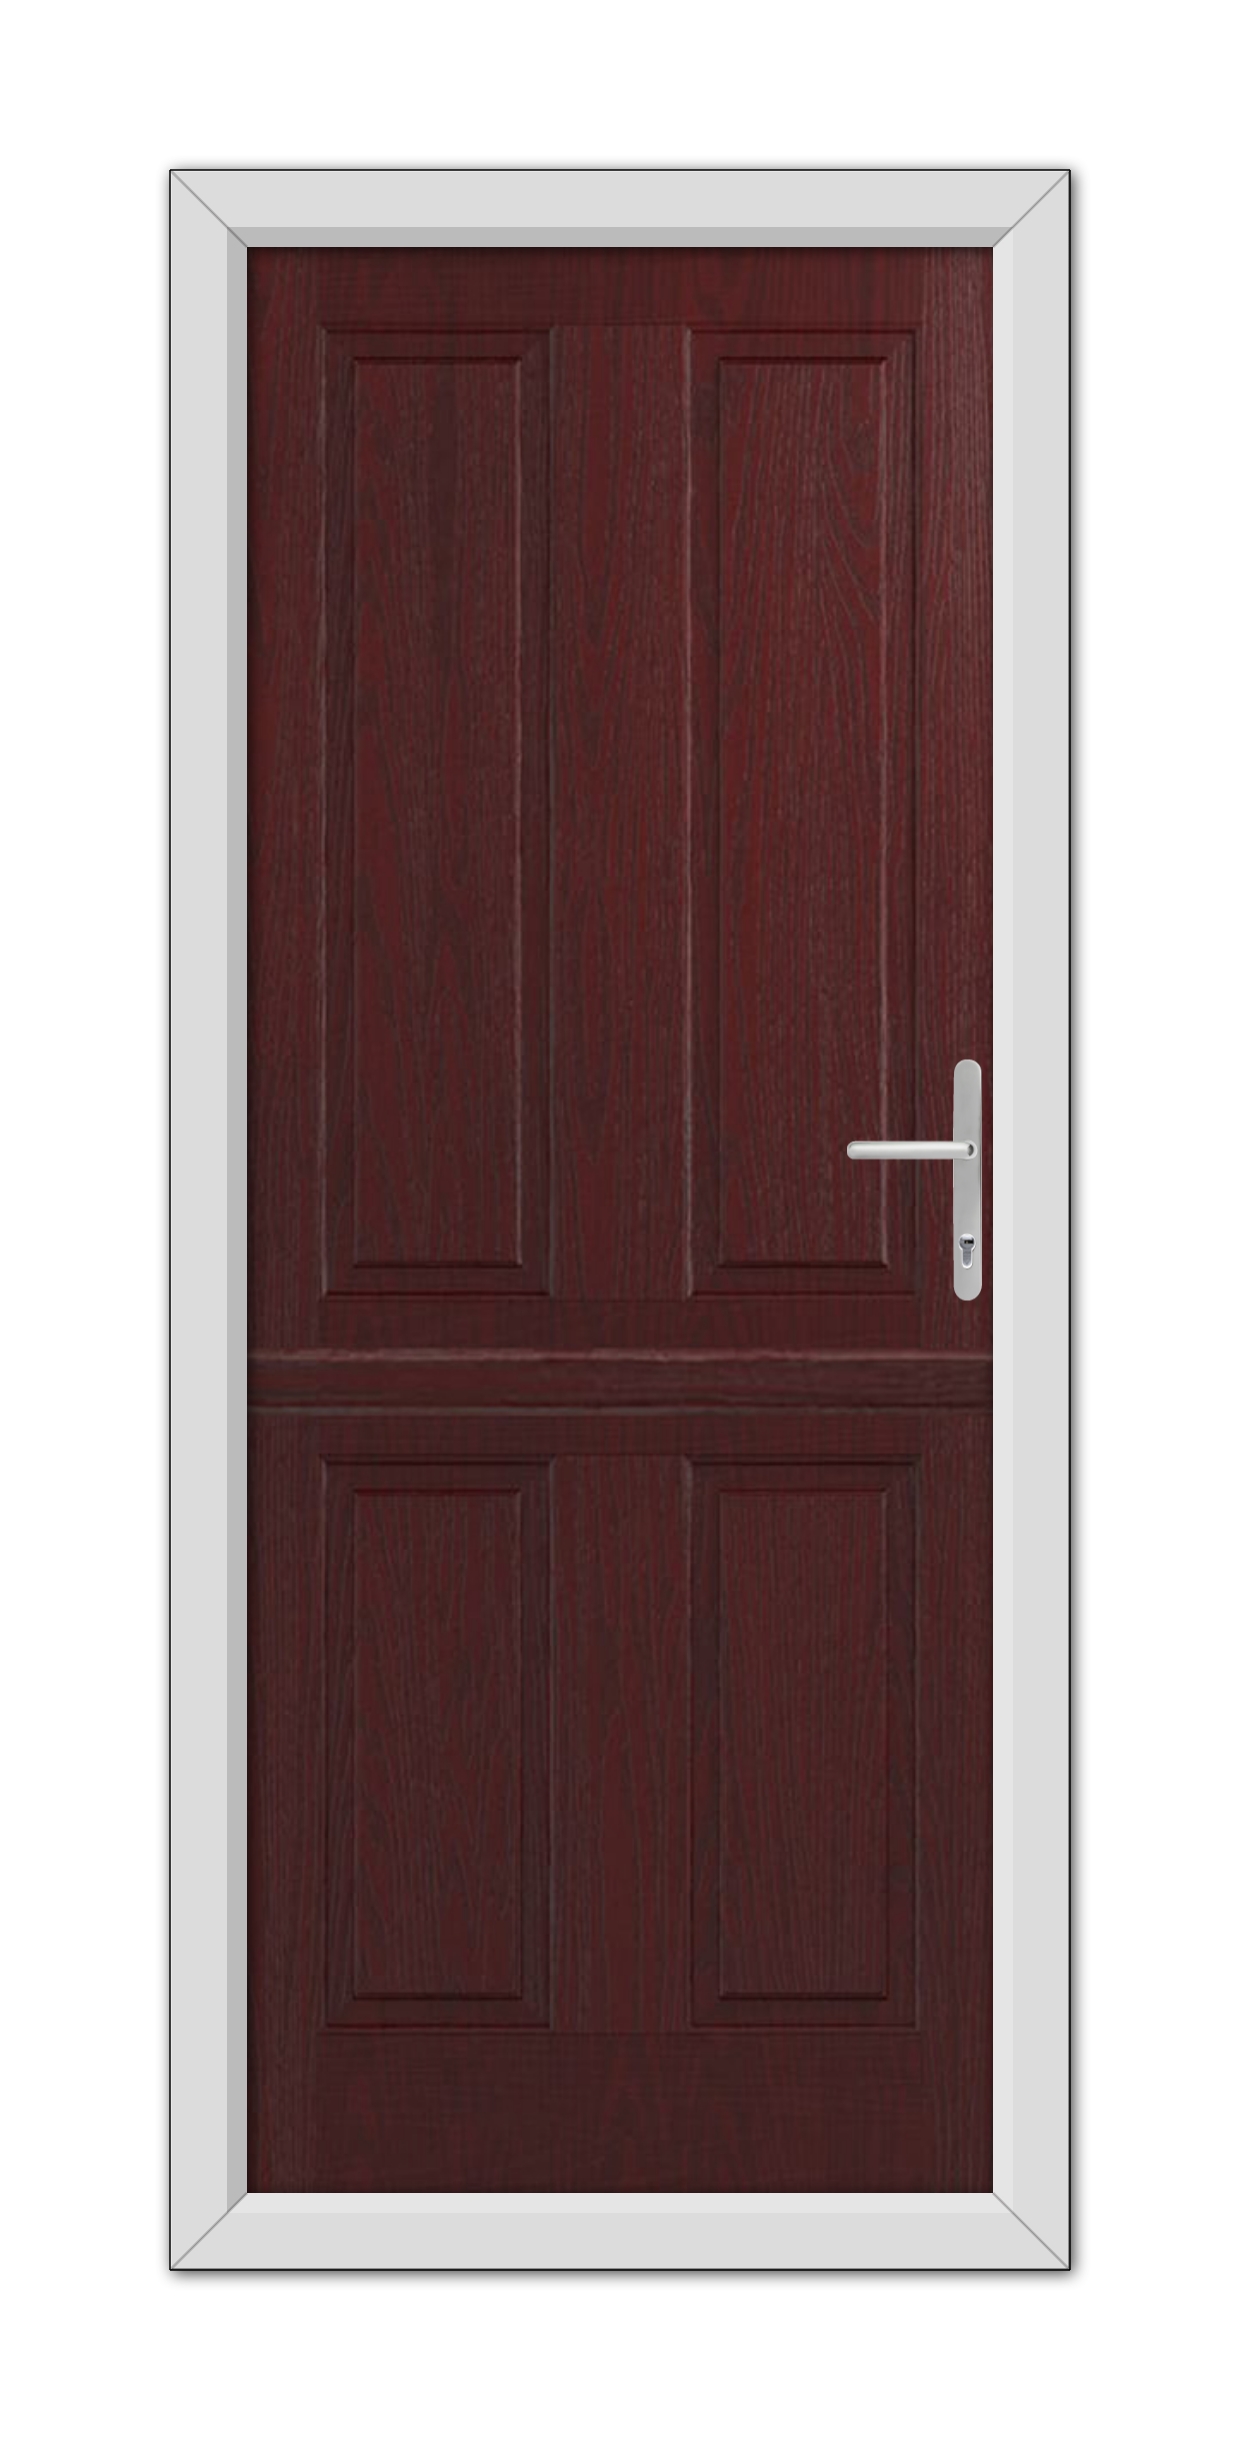 A Rosewood Whitmore Solid Stable Composite Door 48mm Timber Core with a silver handle, framed within a white doorframe.